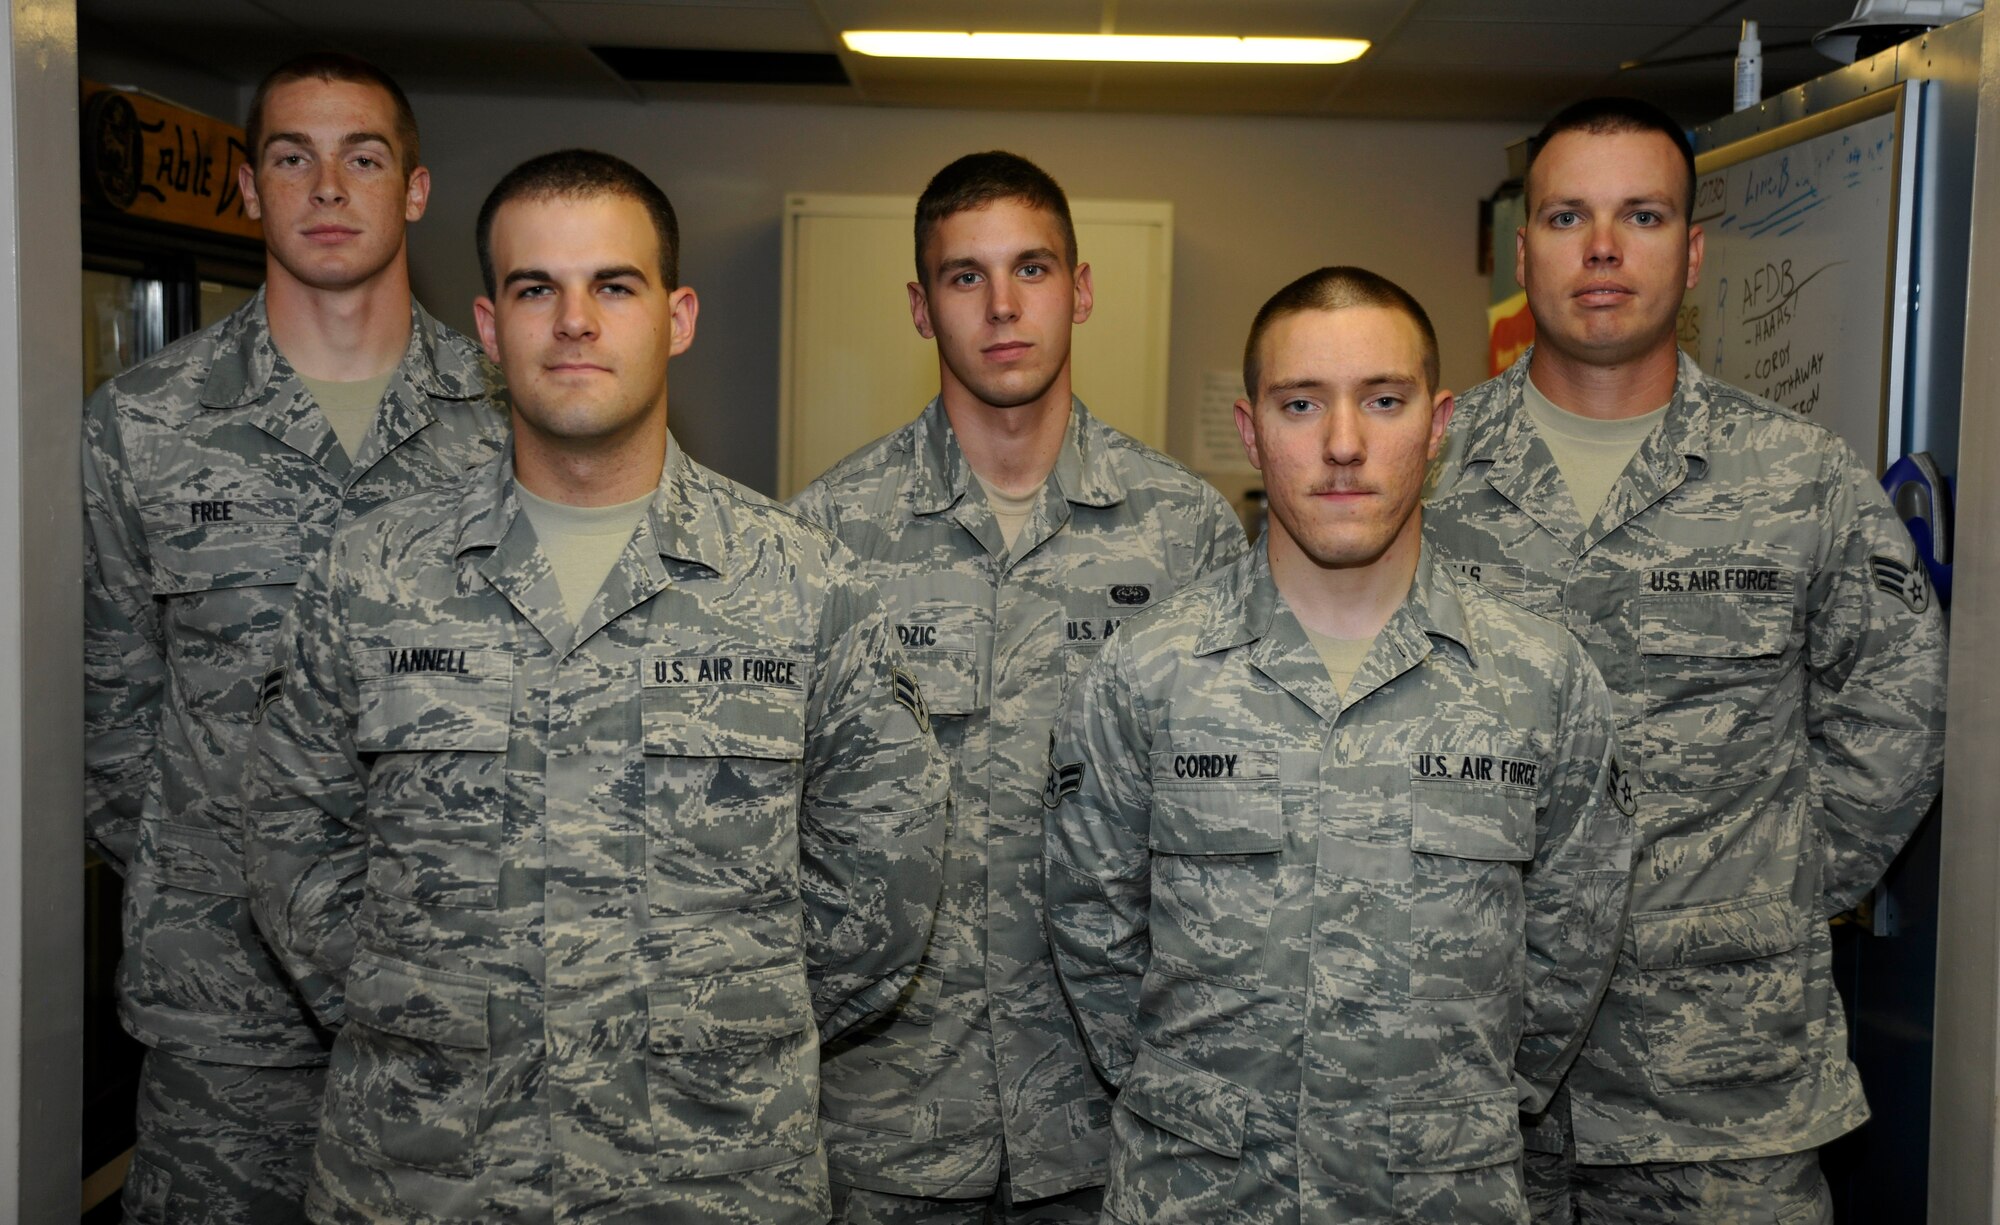 From left to right: Senior Airman Carl Free, Airman 1st Class Travis Yannell, Airman 1st Class Norbert Dudzic, Airman 1st Class Eli Cordy and Senior Airman Michael Wells, members of the 744th Communications Squadron's Airman Motivation Program (AMP), pose for a photo May 9 inside Building 1539. AMP encourages Andrews' base populous to seek self improvement through activities that foster teamwork, physical fitness and unit camaraderie. (U.S. Air Force photo/Senior Airman Lindsey A. Porter)
